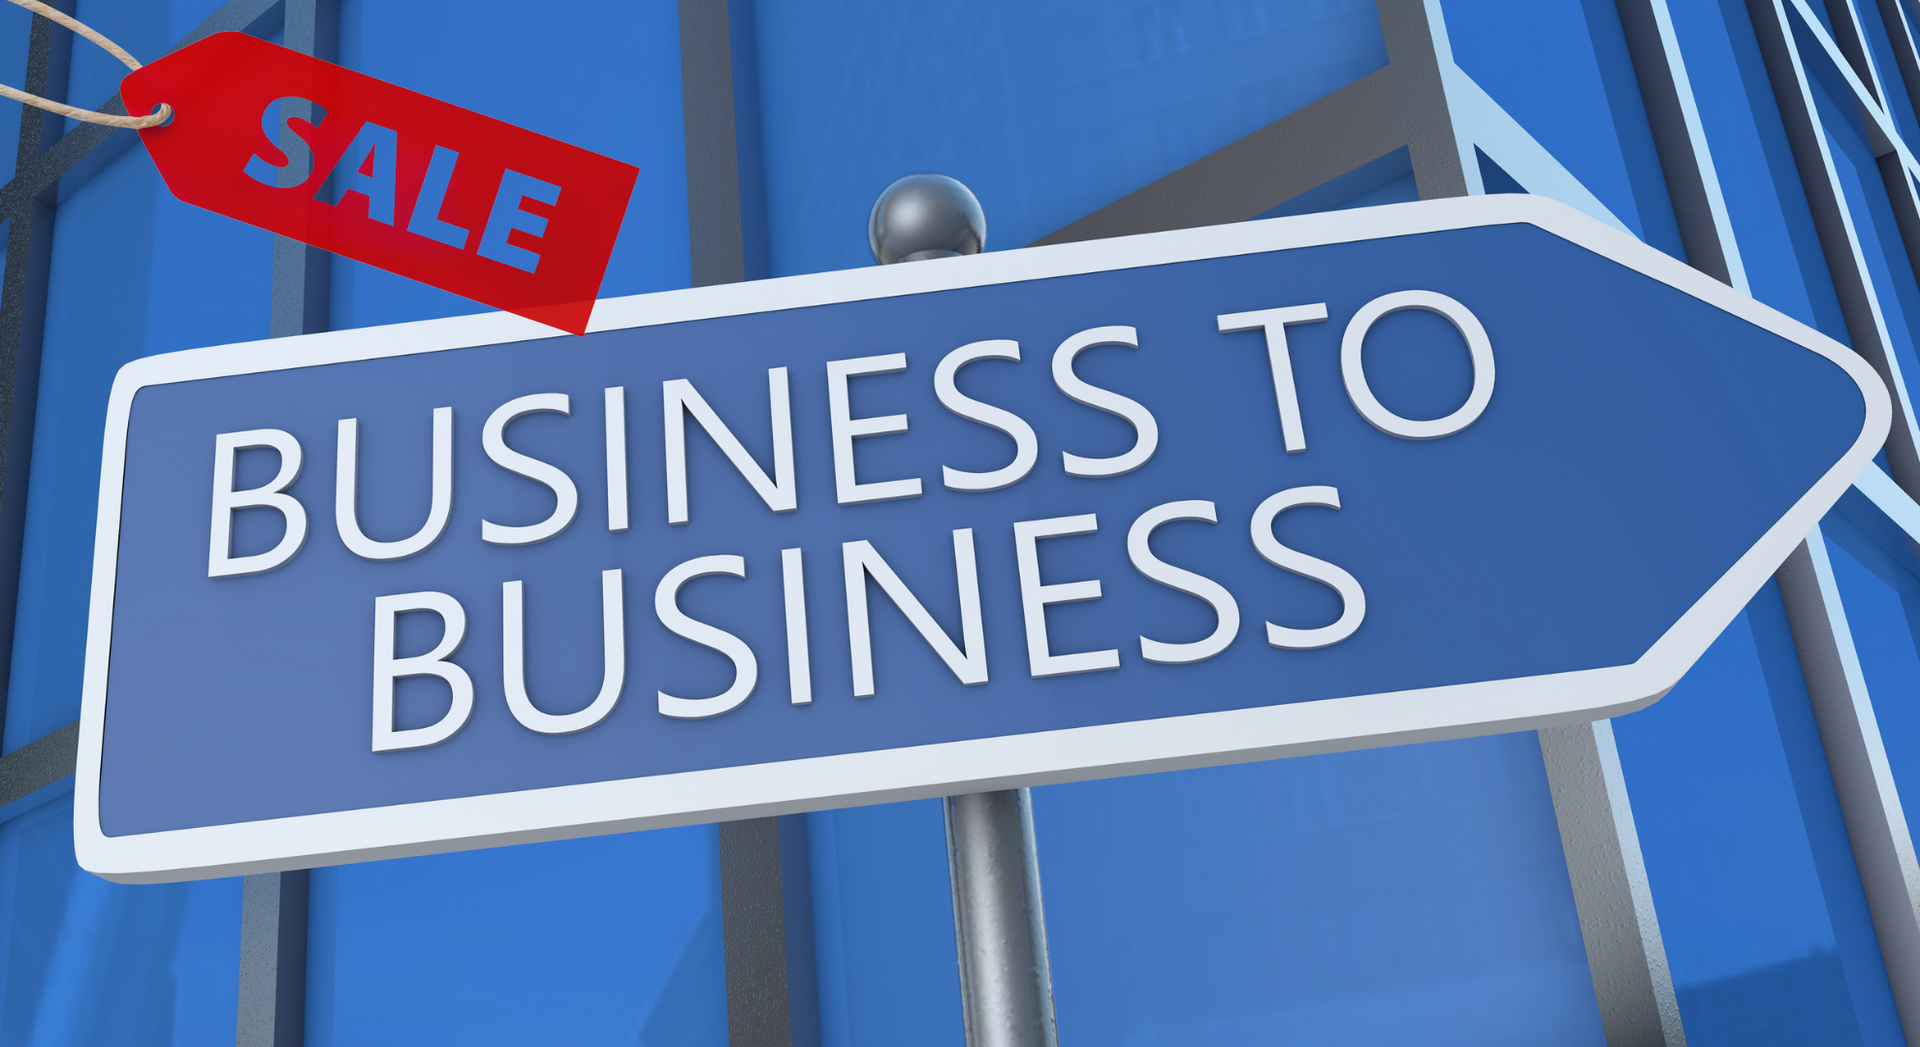 Where to list business for sale